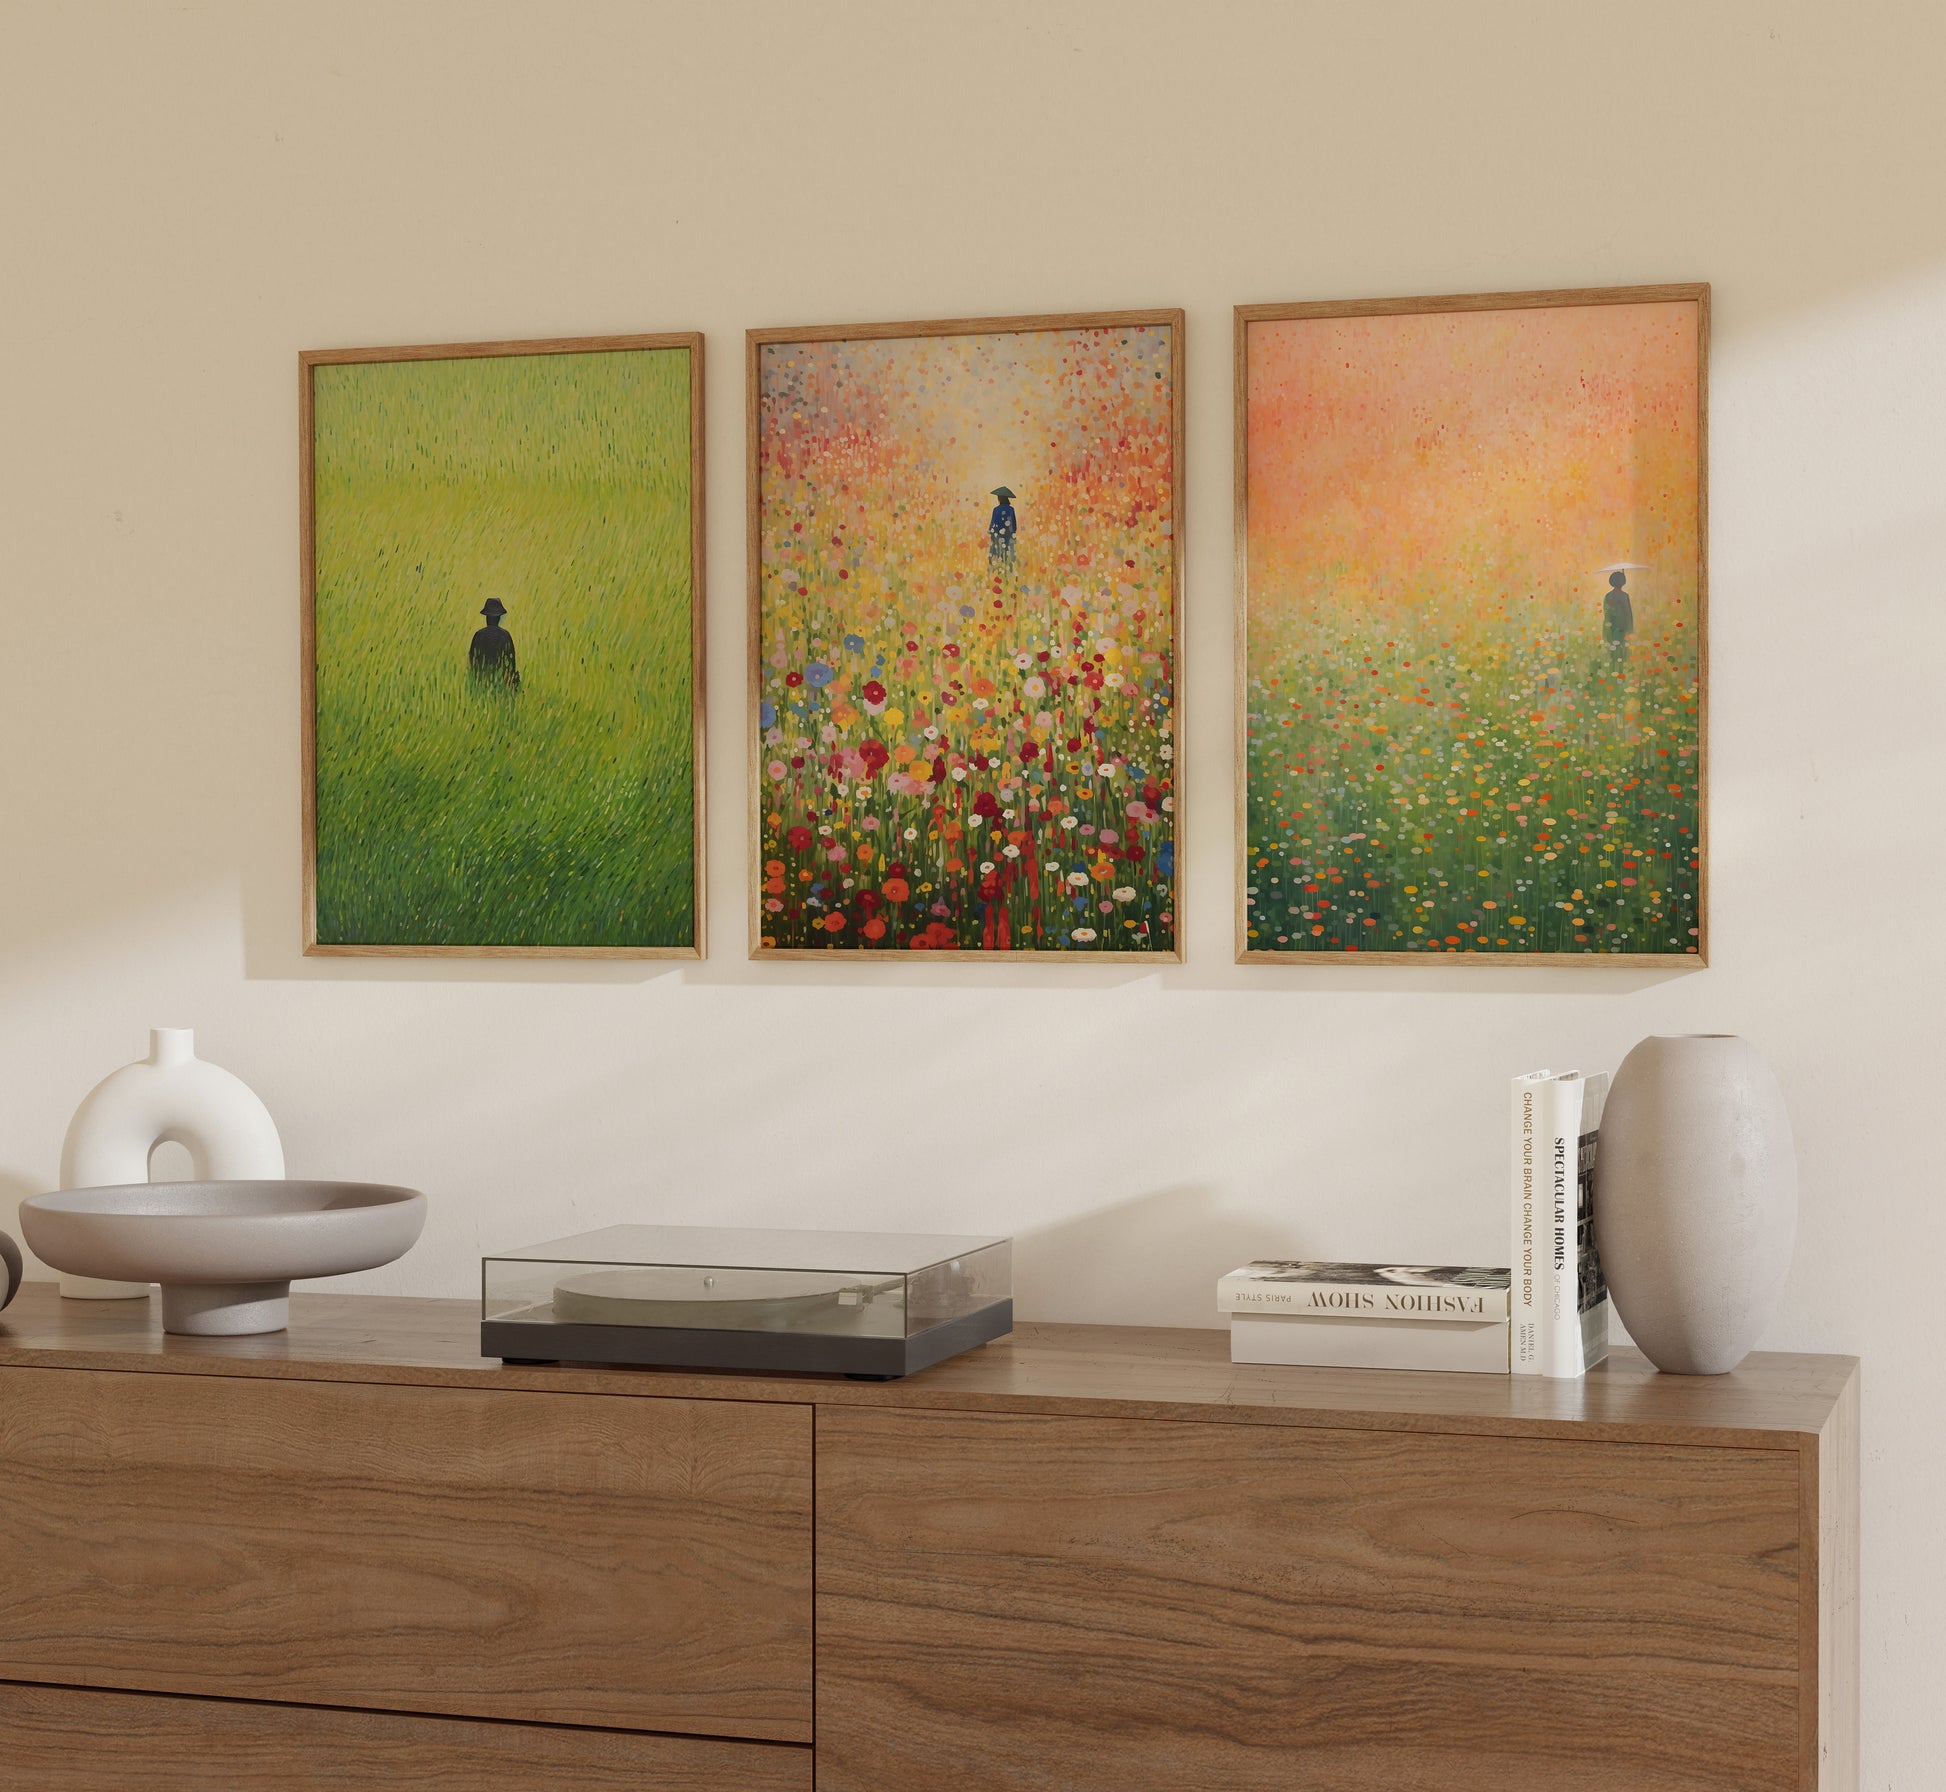 Three framed paintings of solitary figures in fields on a wall above a wooden sideboard with decorative items.